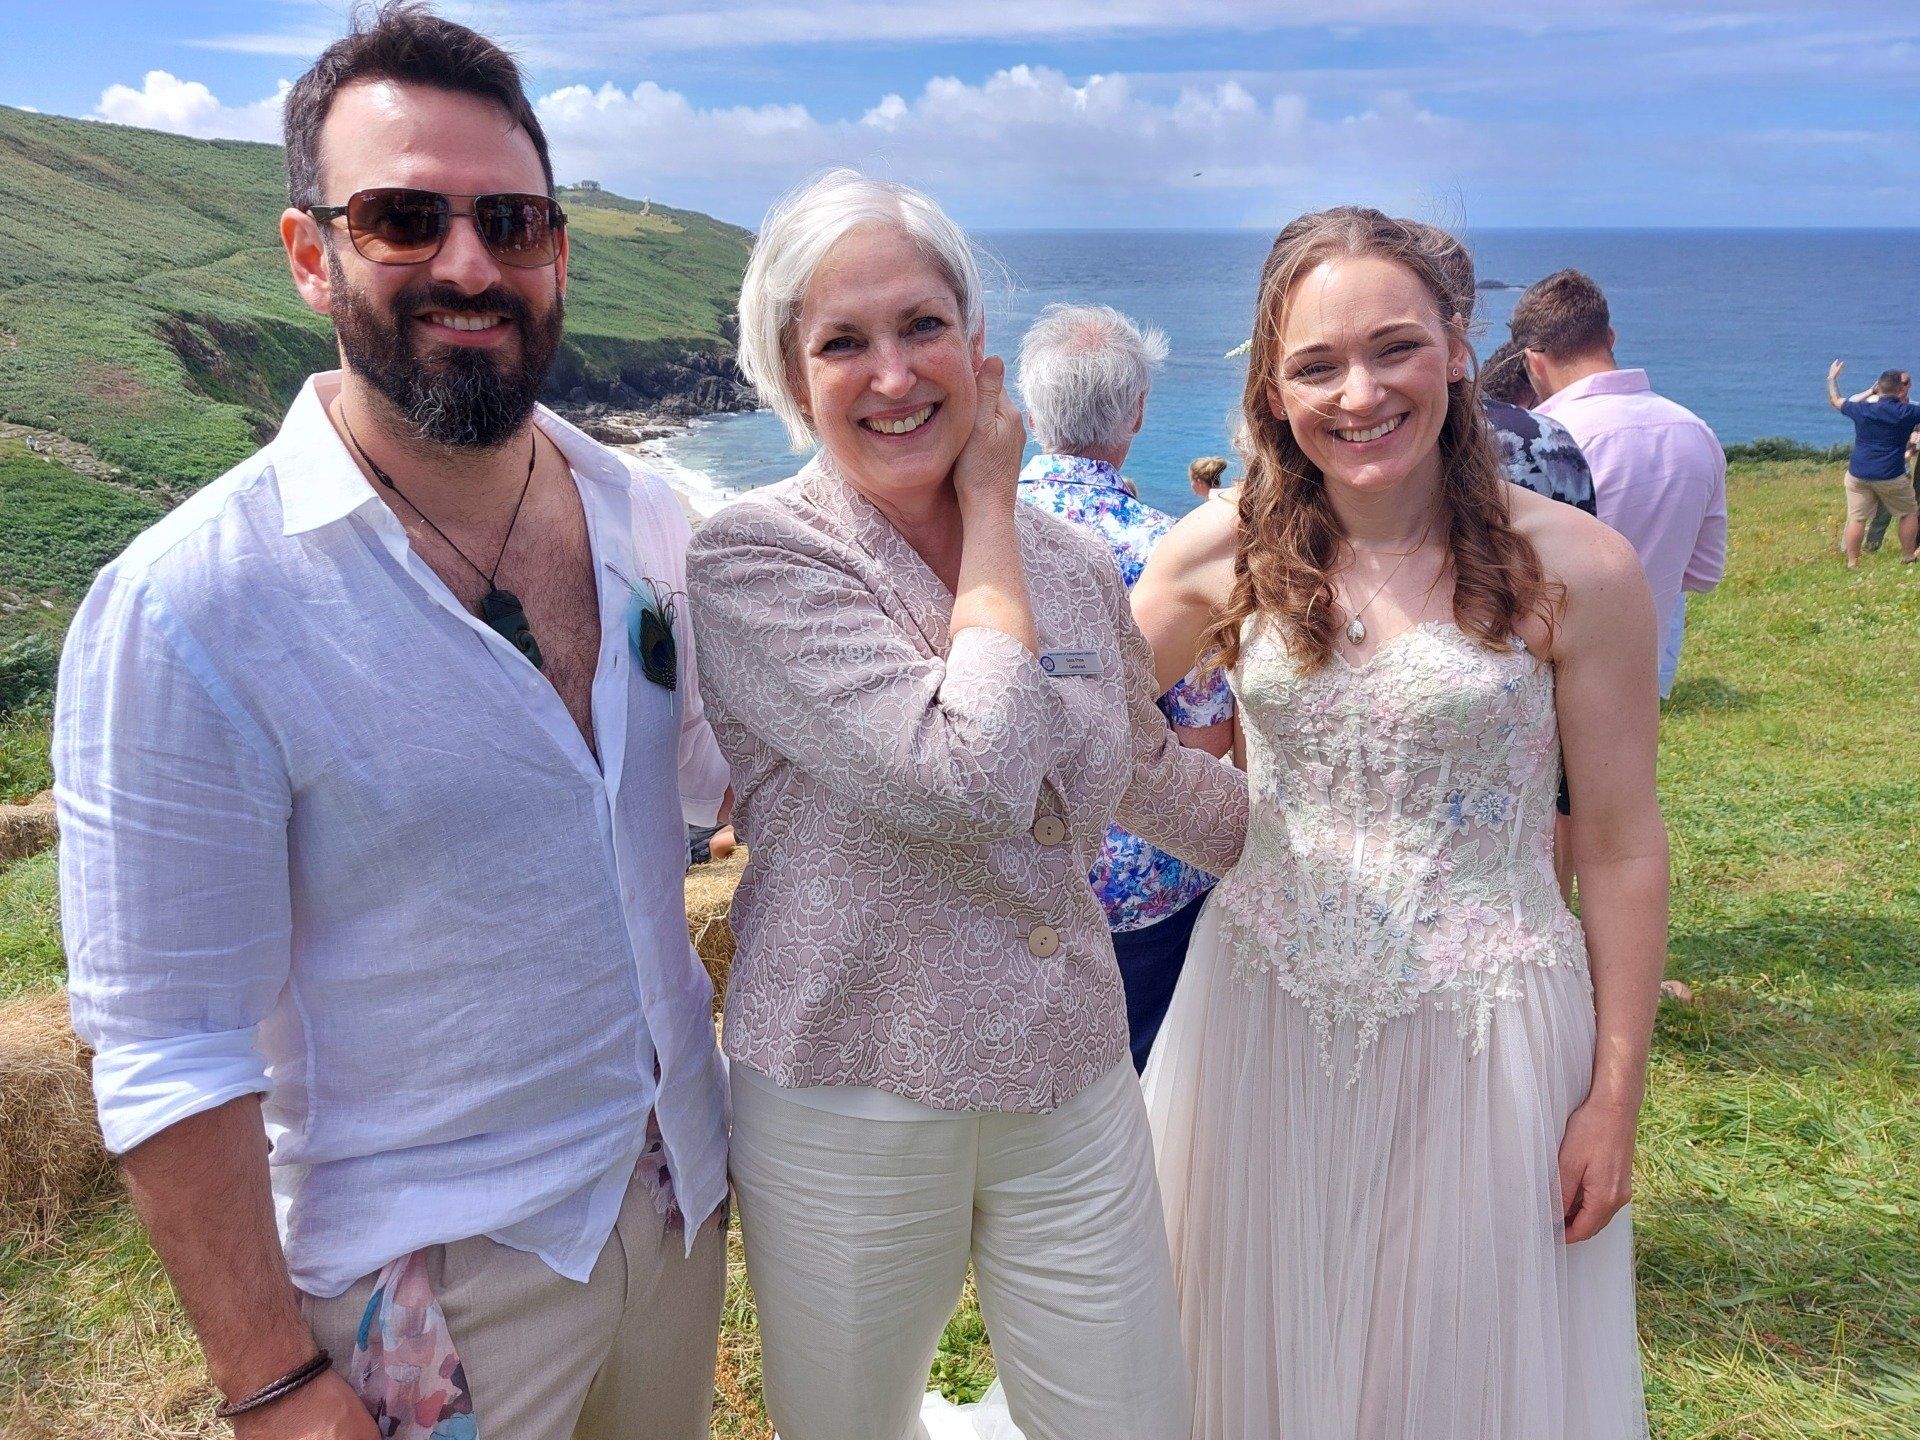 Bride and groom with Sara Price Celebrant after their clifftop wedding ceremony.